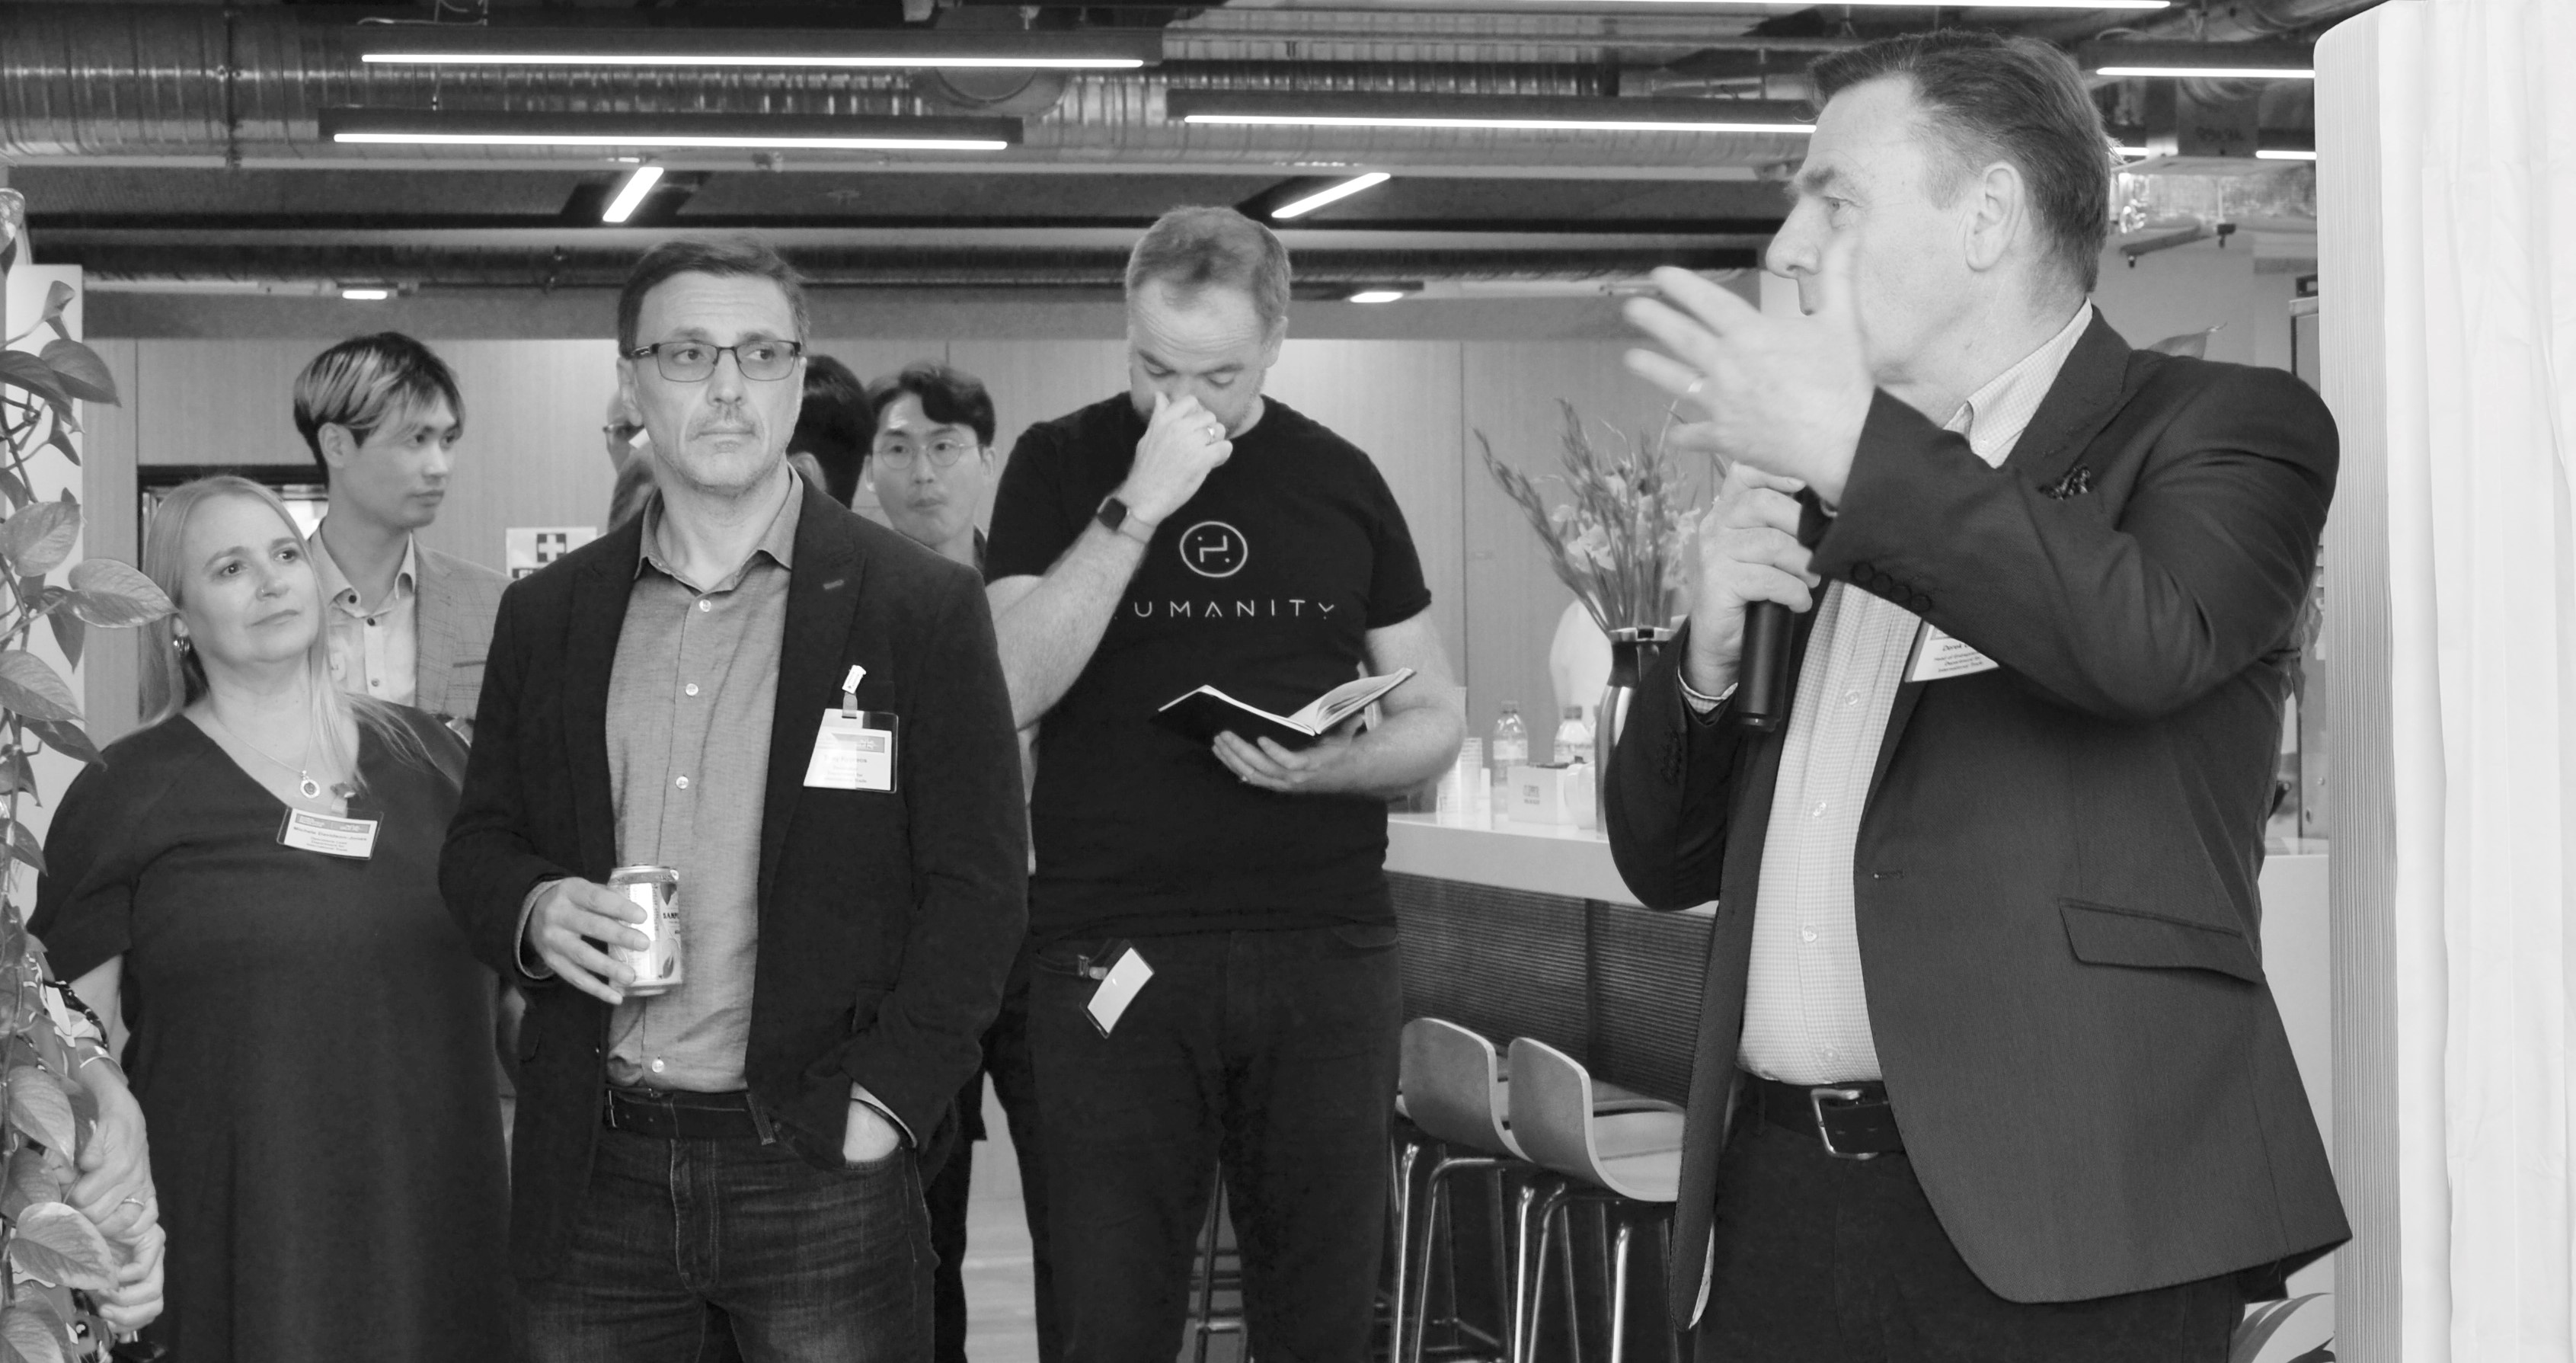 GEP Masterclass event at London Tech Week Sept 2021, hosted by WONGDOODY - GEP's Head of Entrepreneurship Derek Goodwin addressing audience